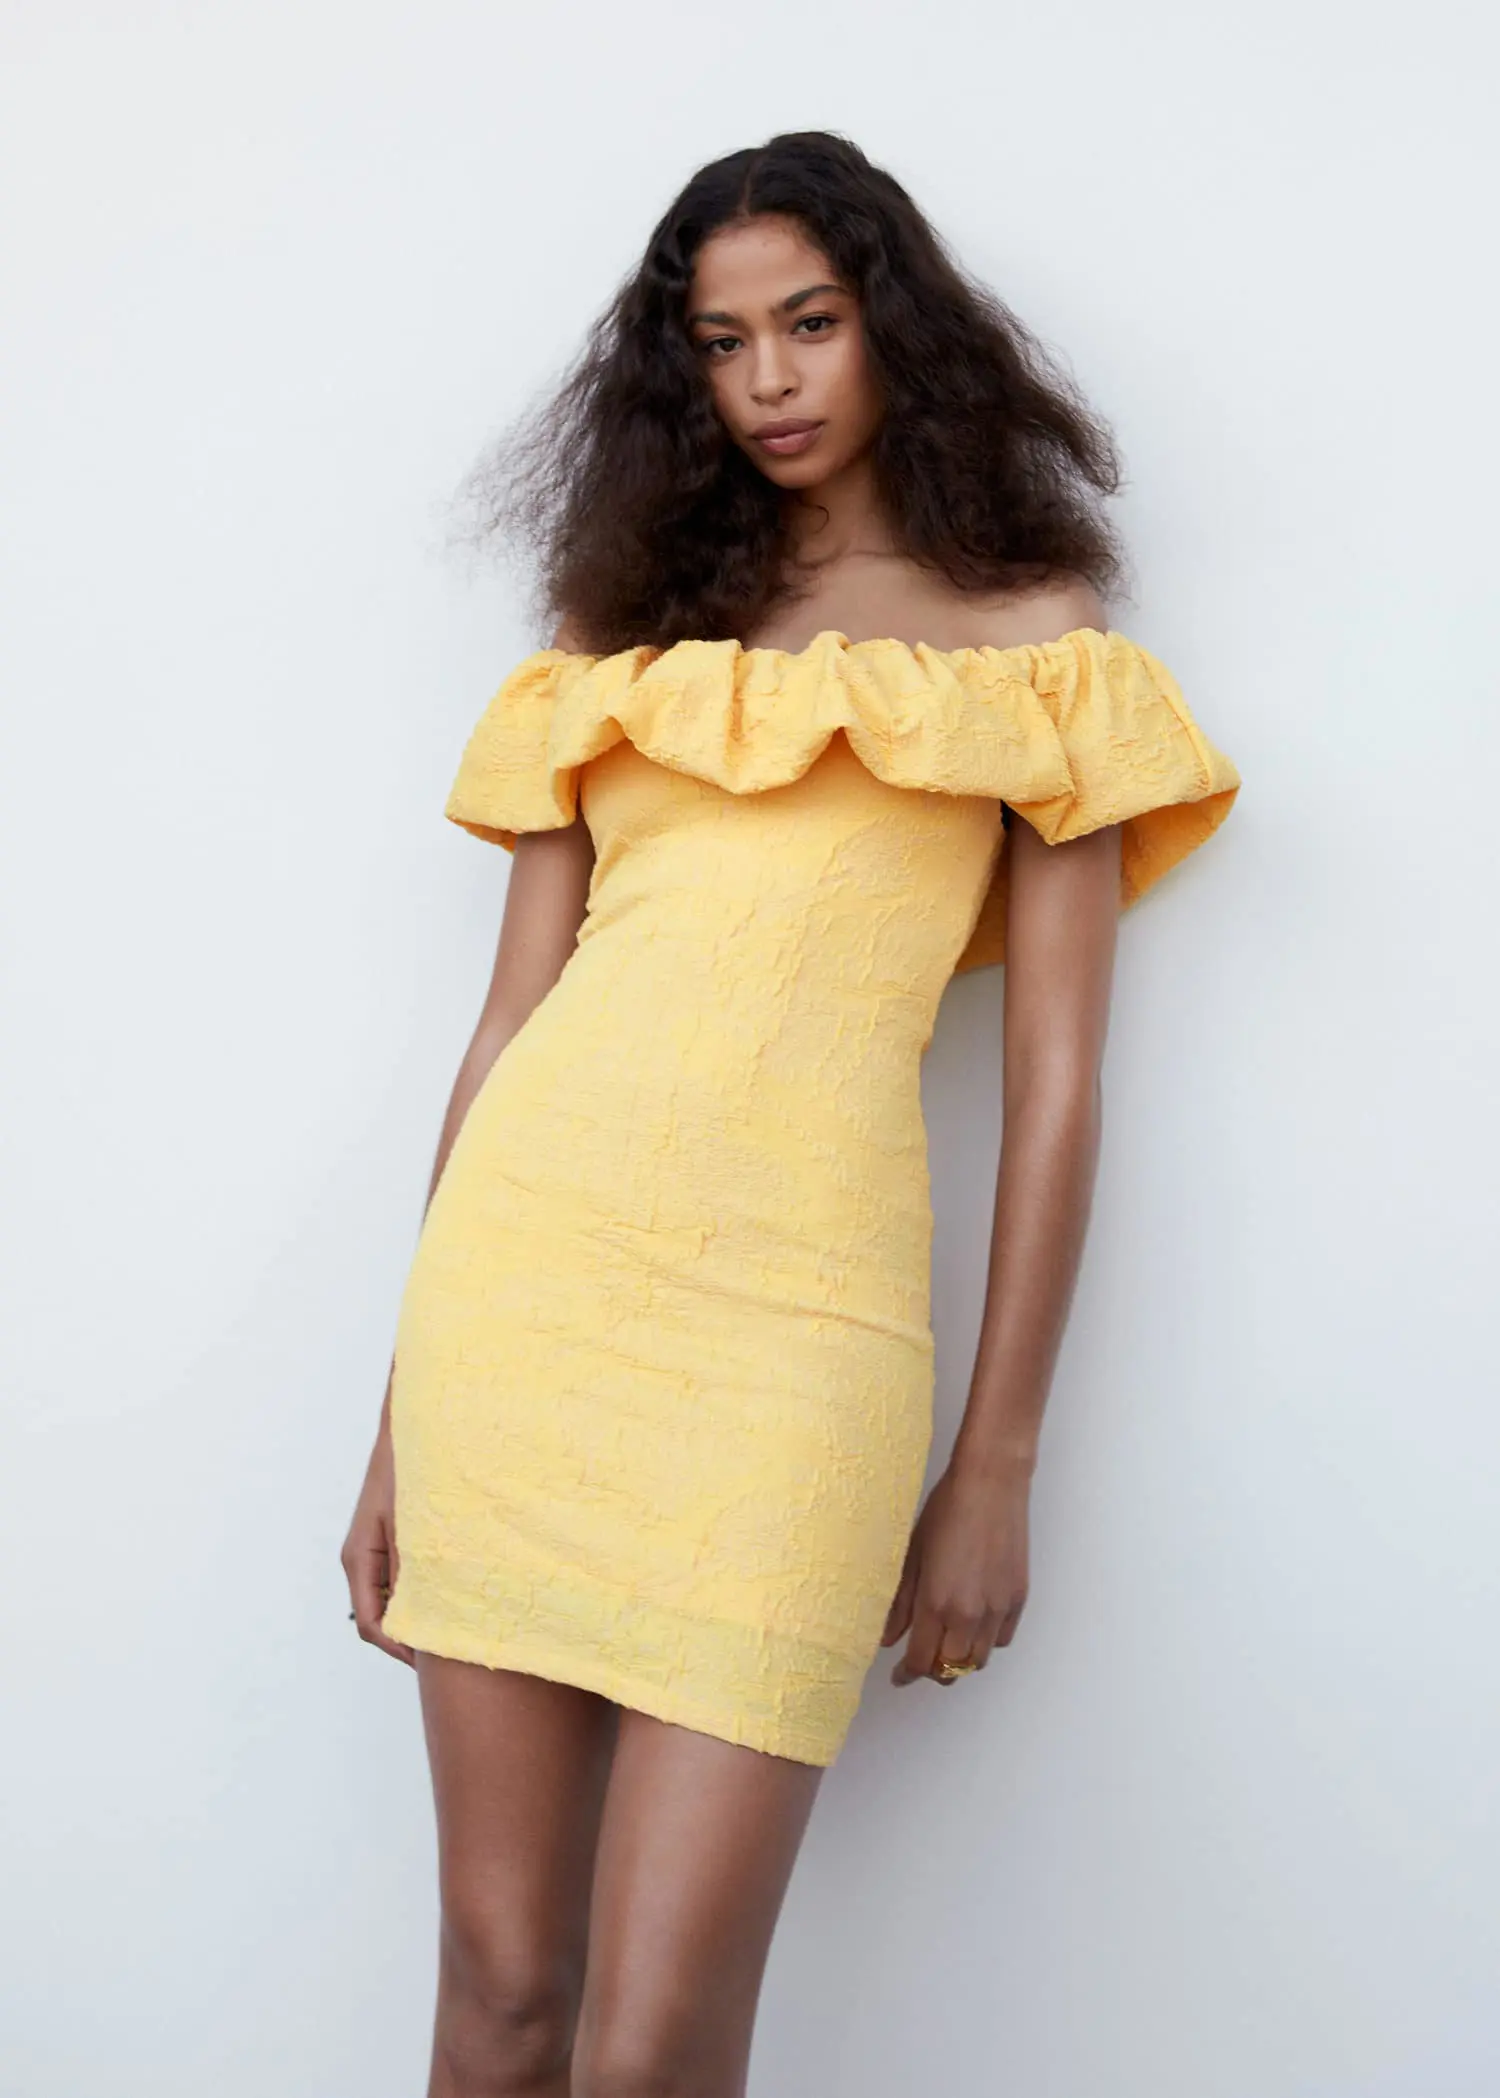 Mango Textured ruffled dress. a woman in a yellow dress posing for a picture. 